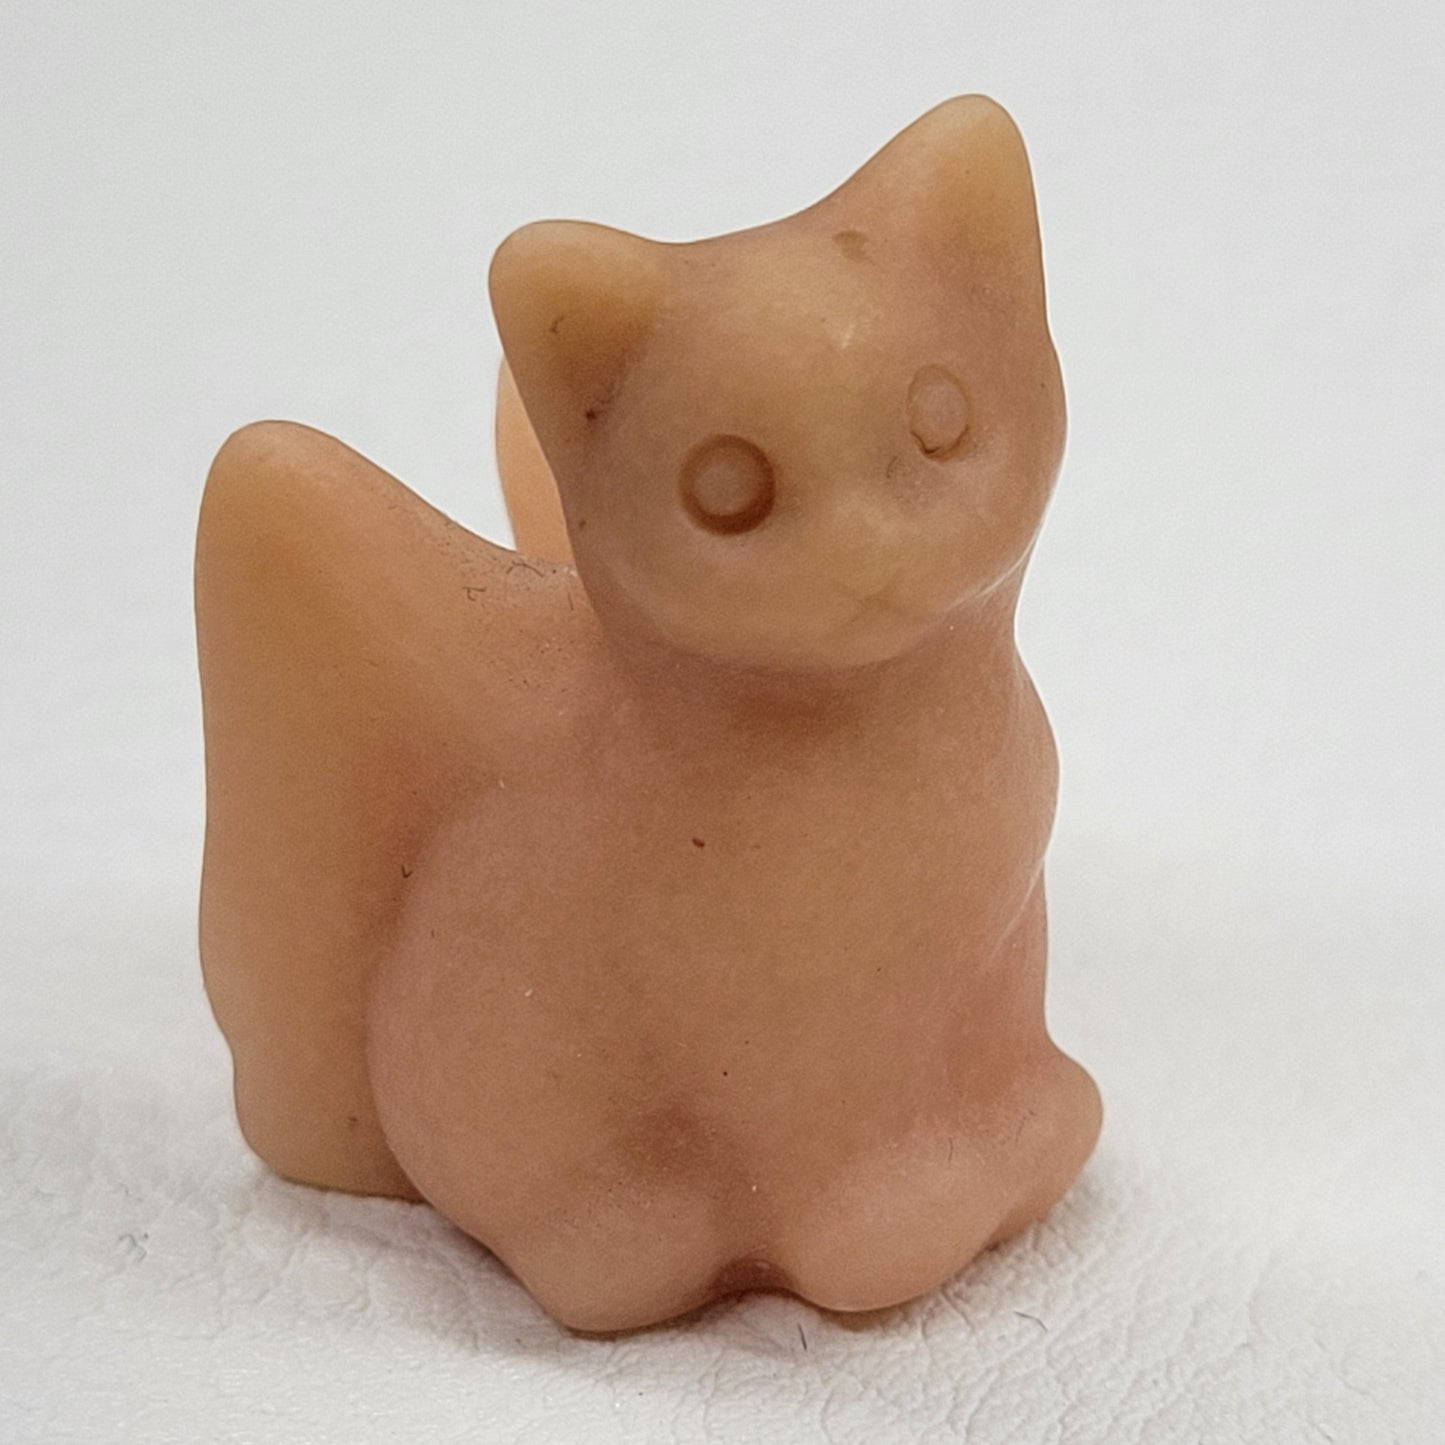 Cat/kitty carving - angel cat